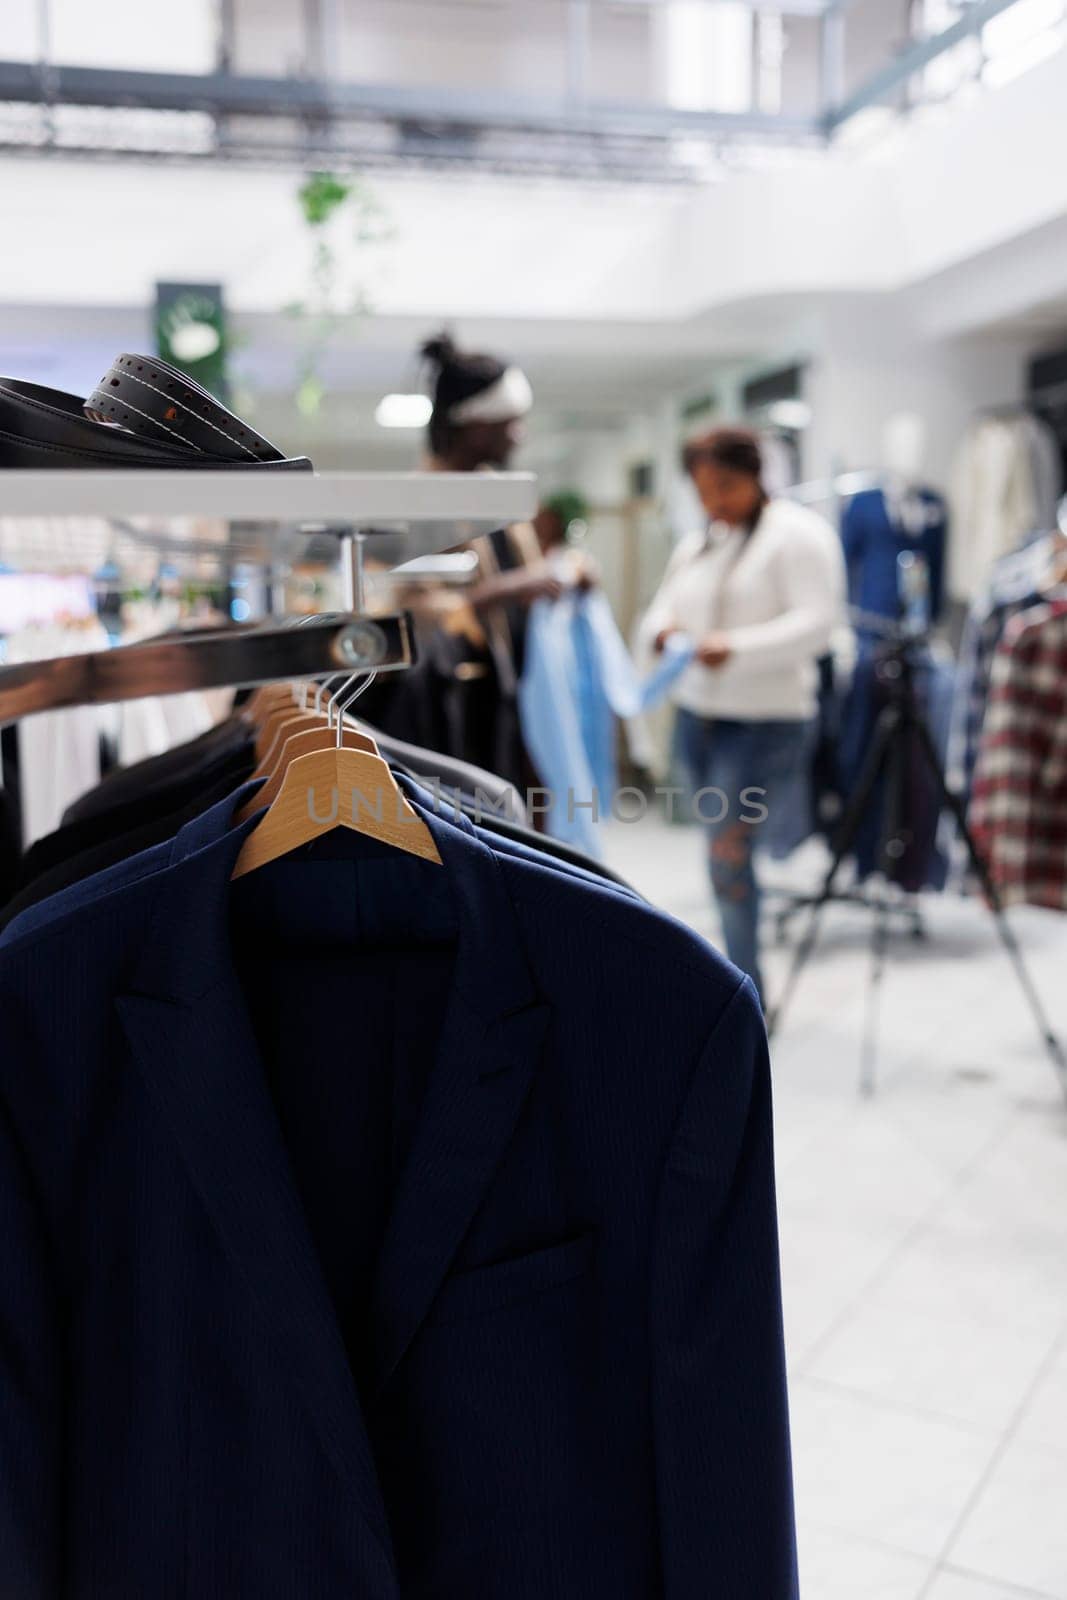 Formal male blazers hanging on rack in fashion boutique with blurred background. Male jackets latest arrival on hangers and accessories on shelf in department shopping mall close up selective focus